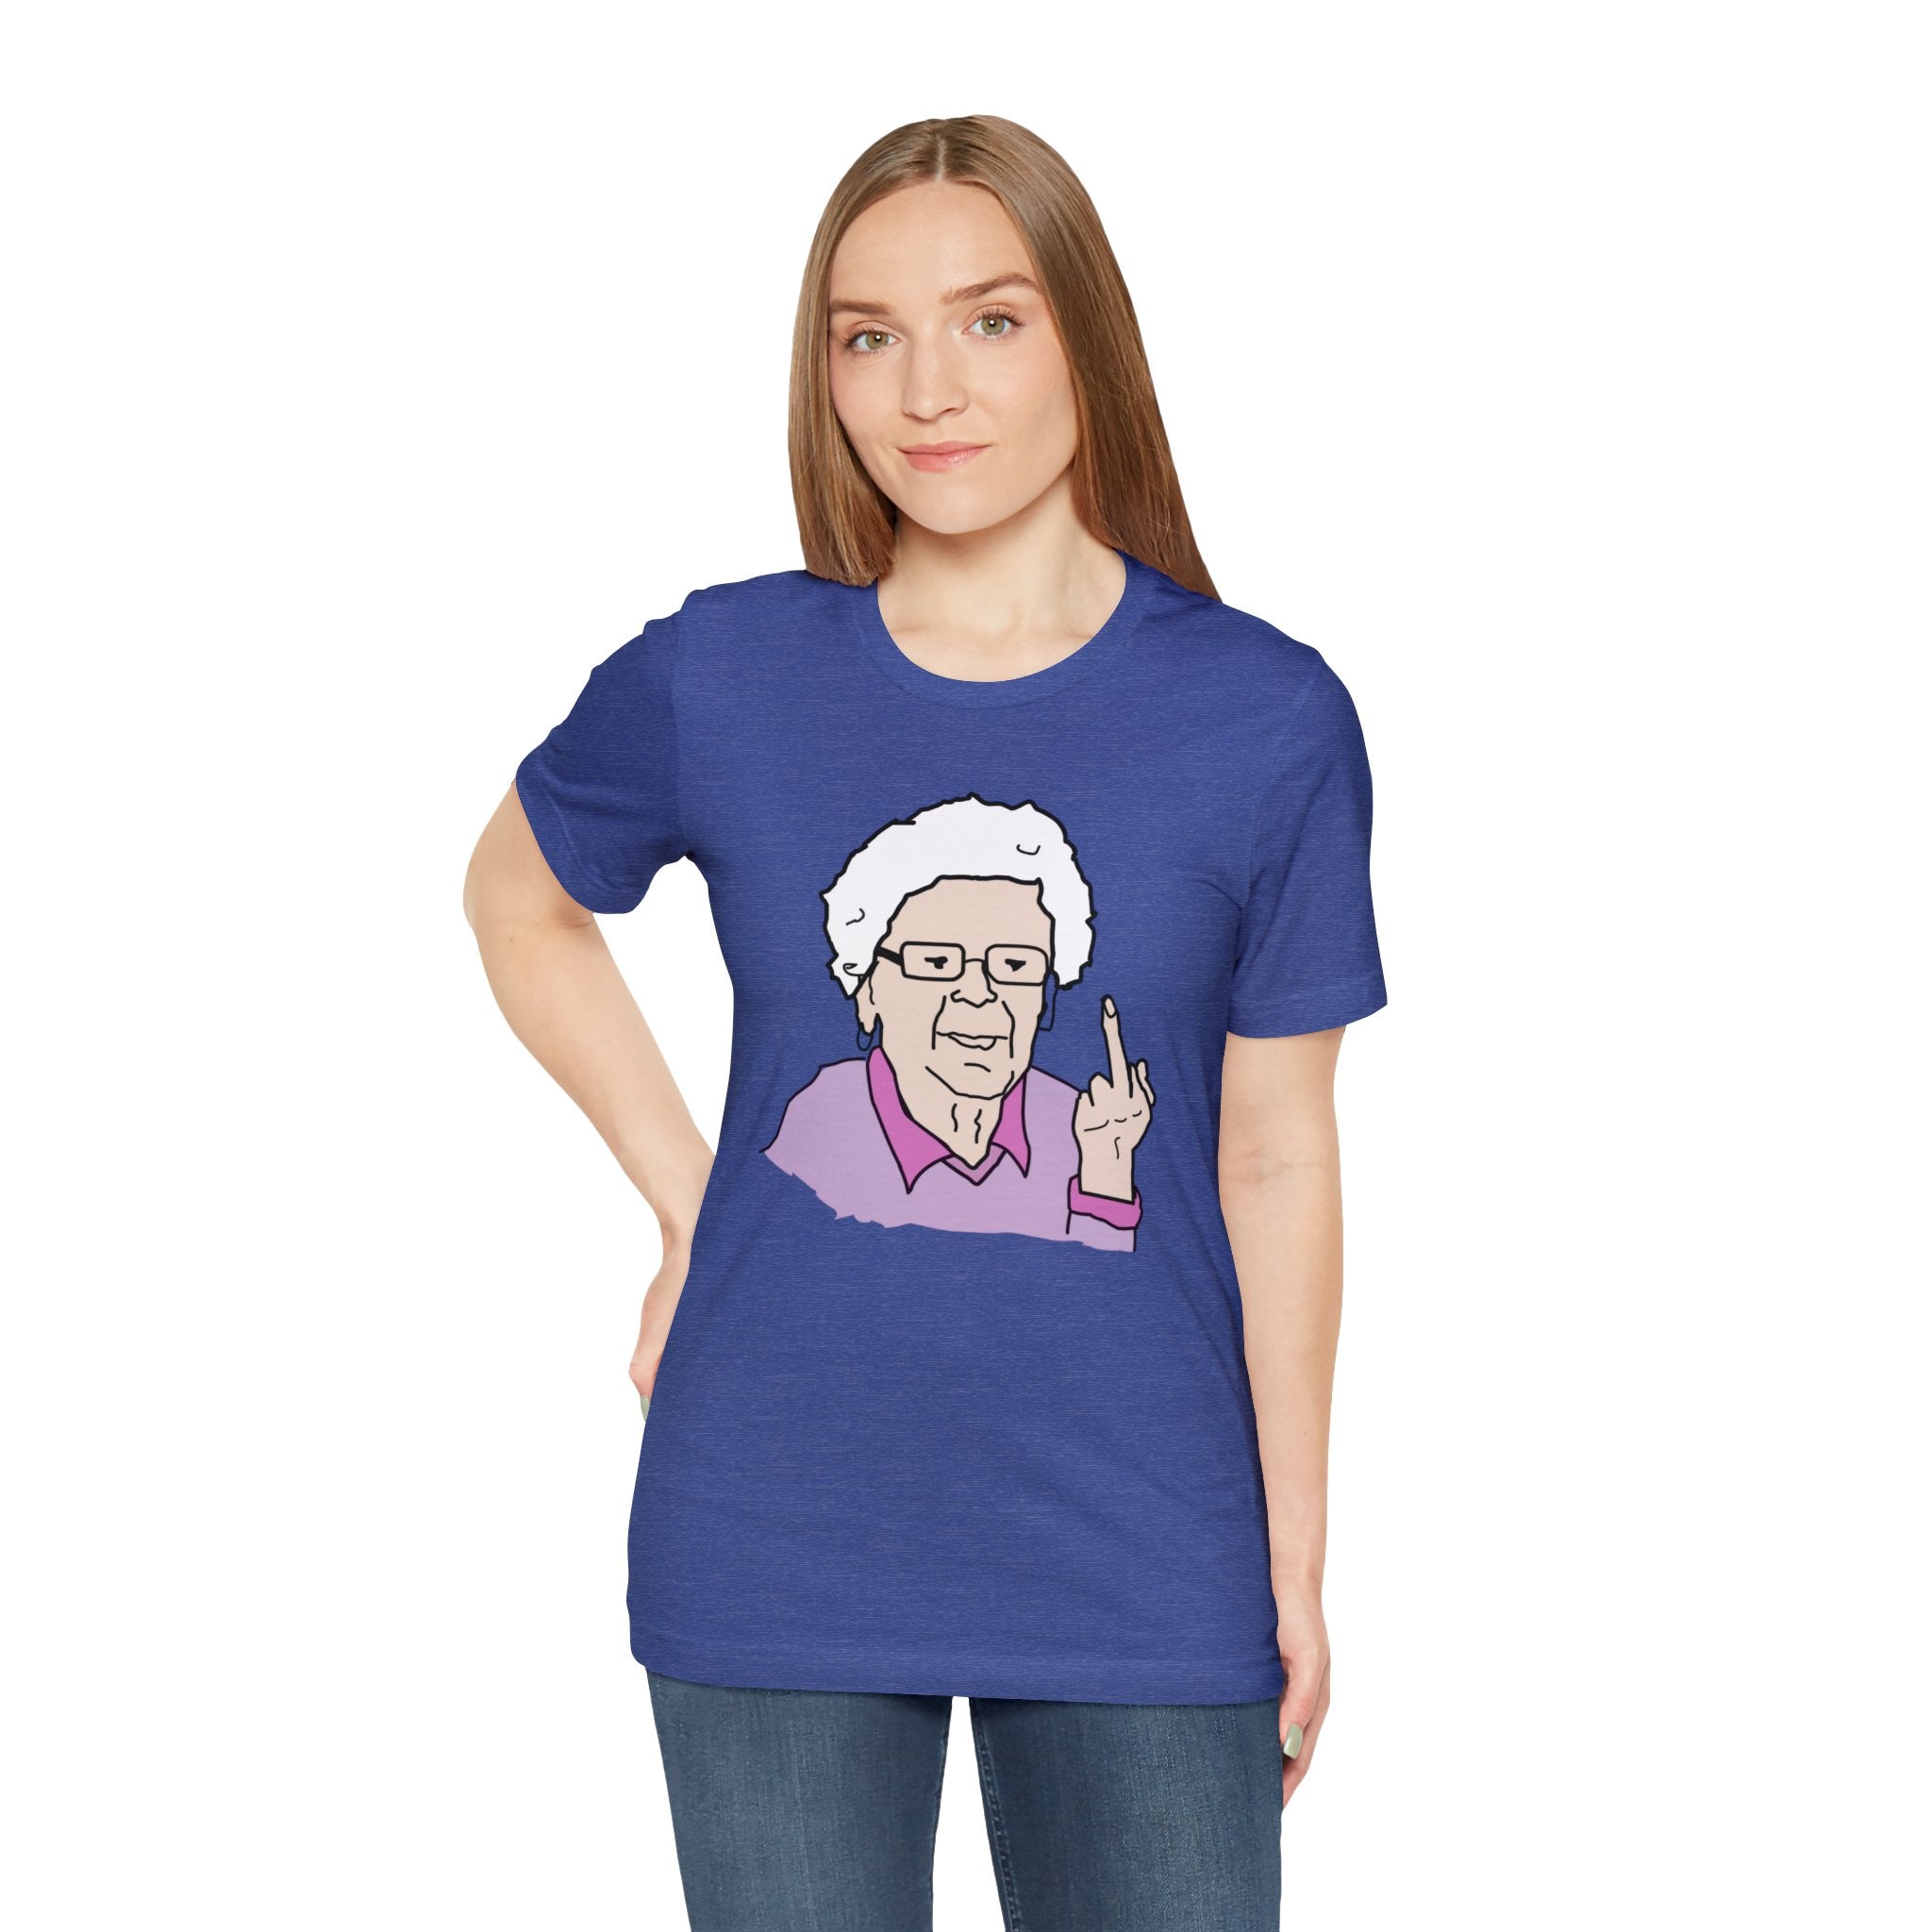 An older woman in a stylish blue Granny T-shirt.